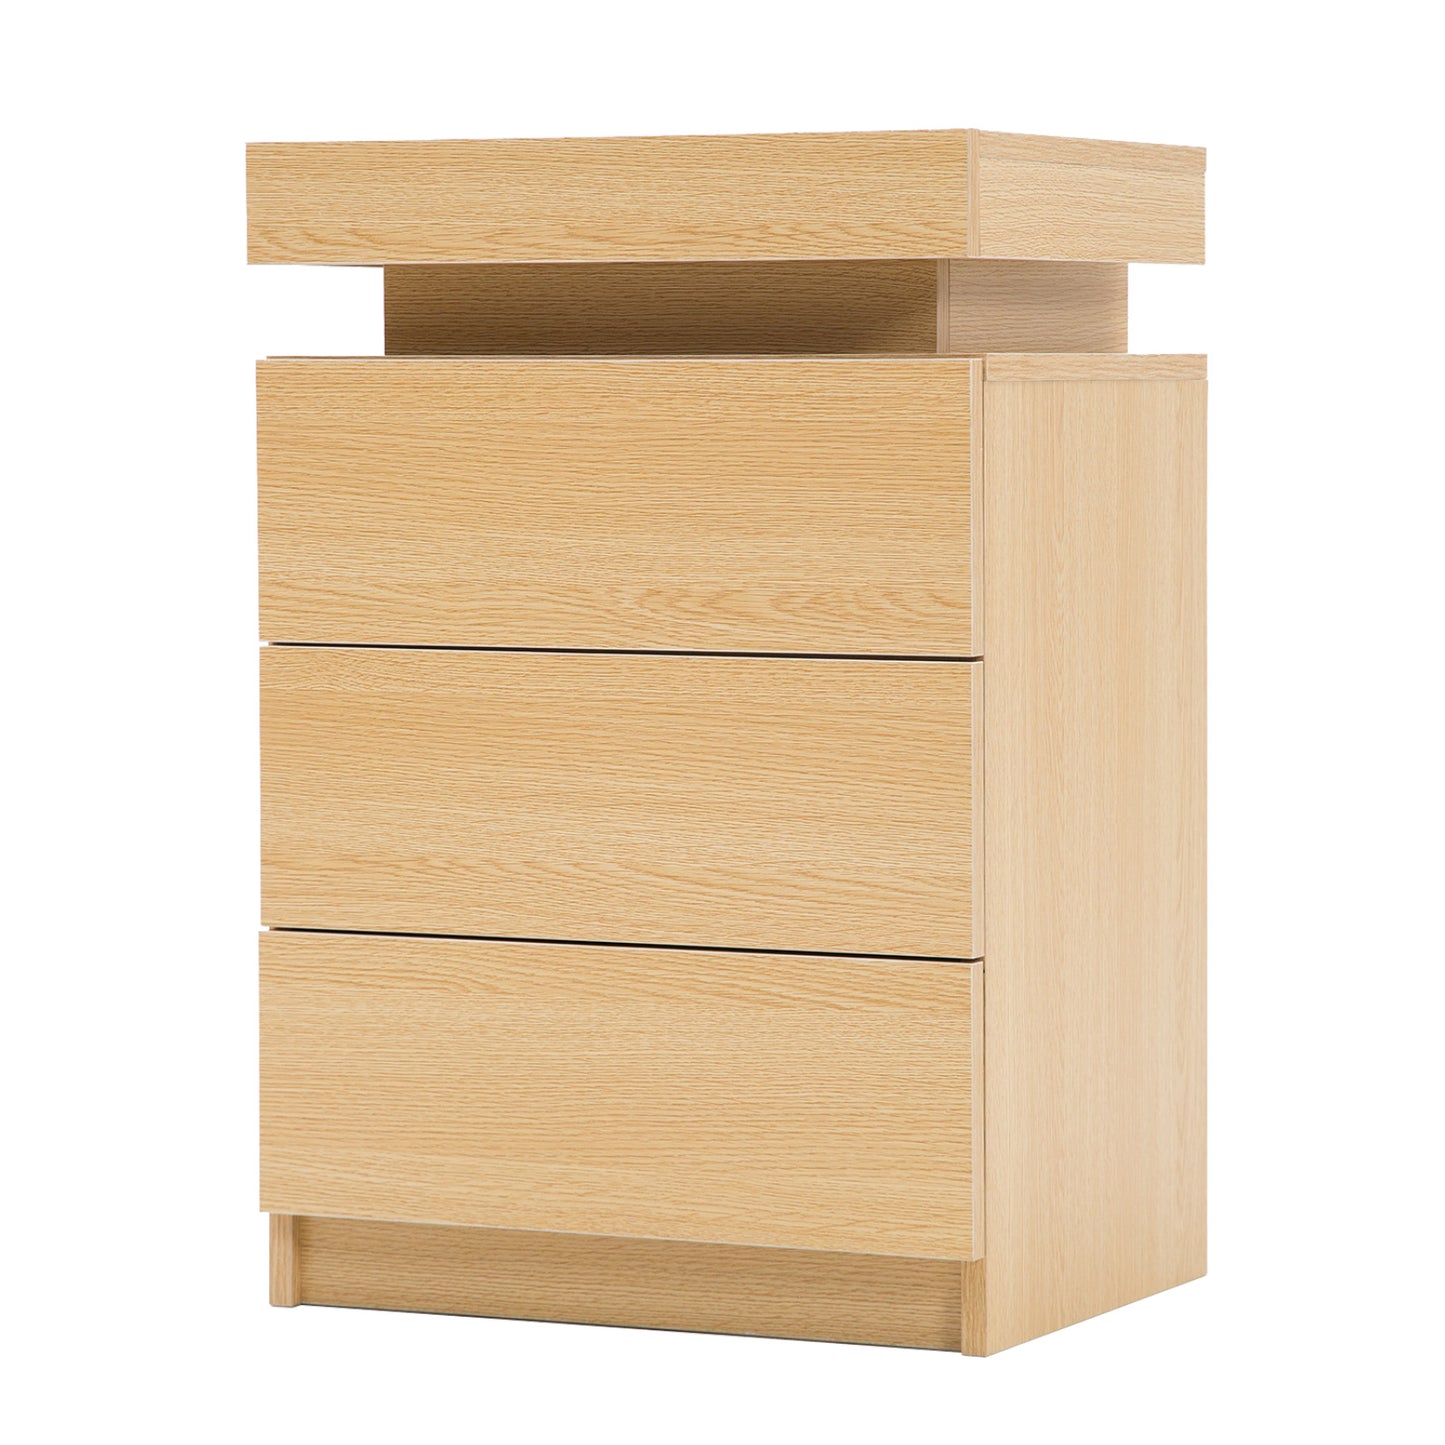 Bedside Table 3 Drawers RGB LED Bedroom Cabinet Nightstand Gloss GLORY OAK